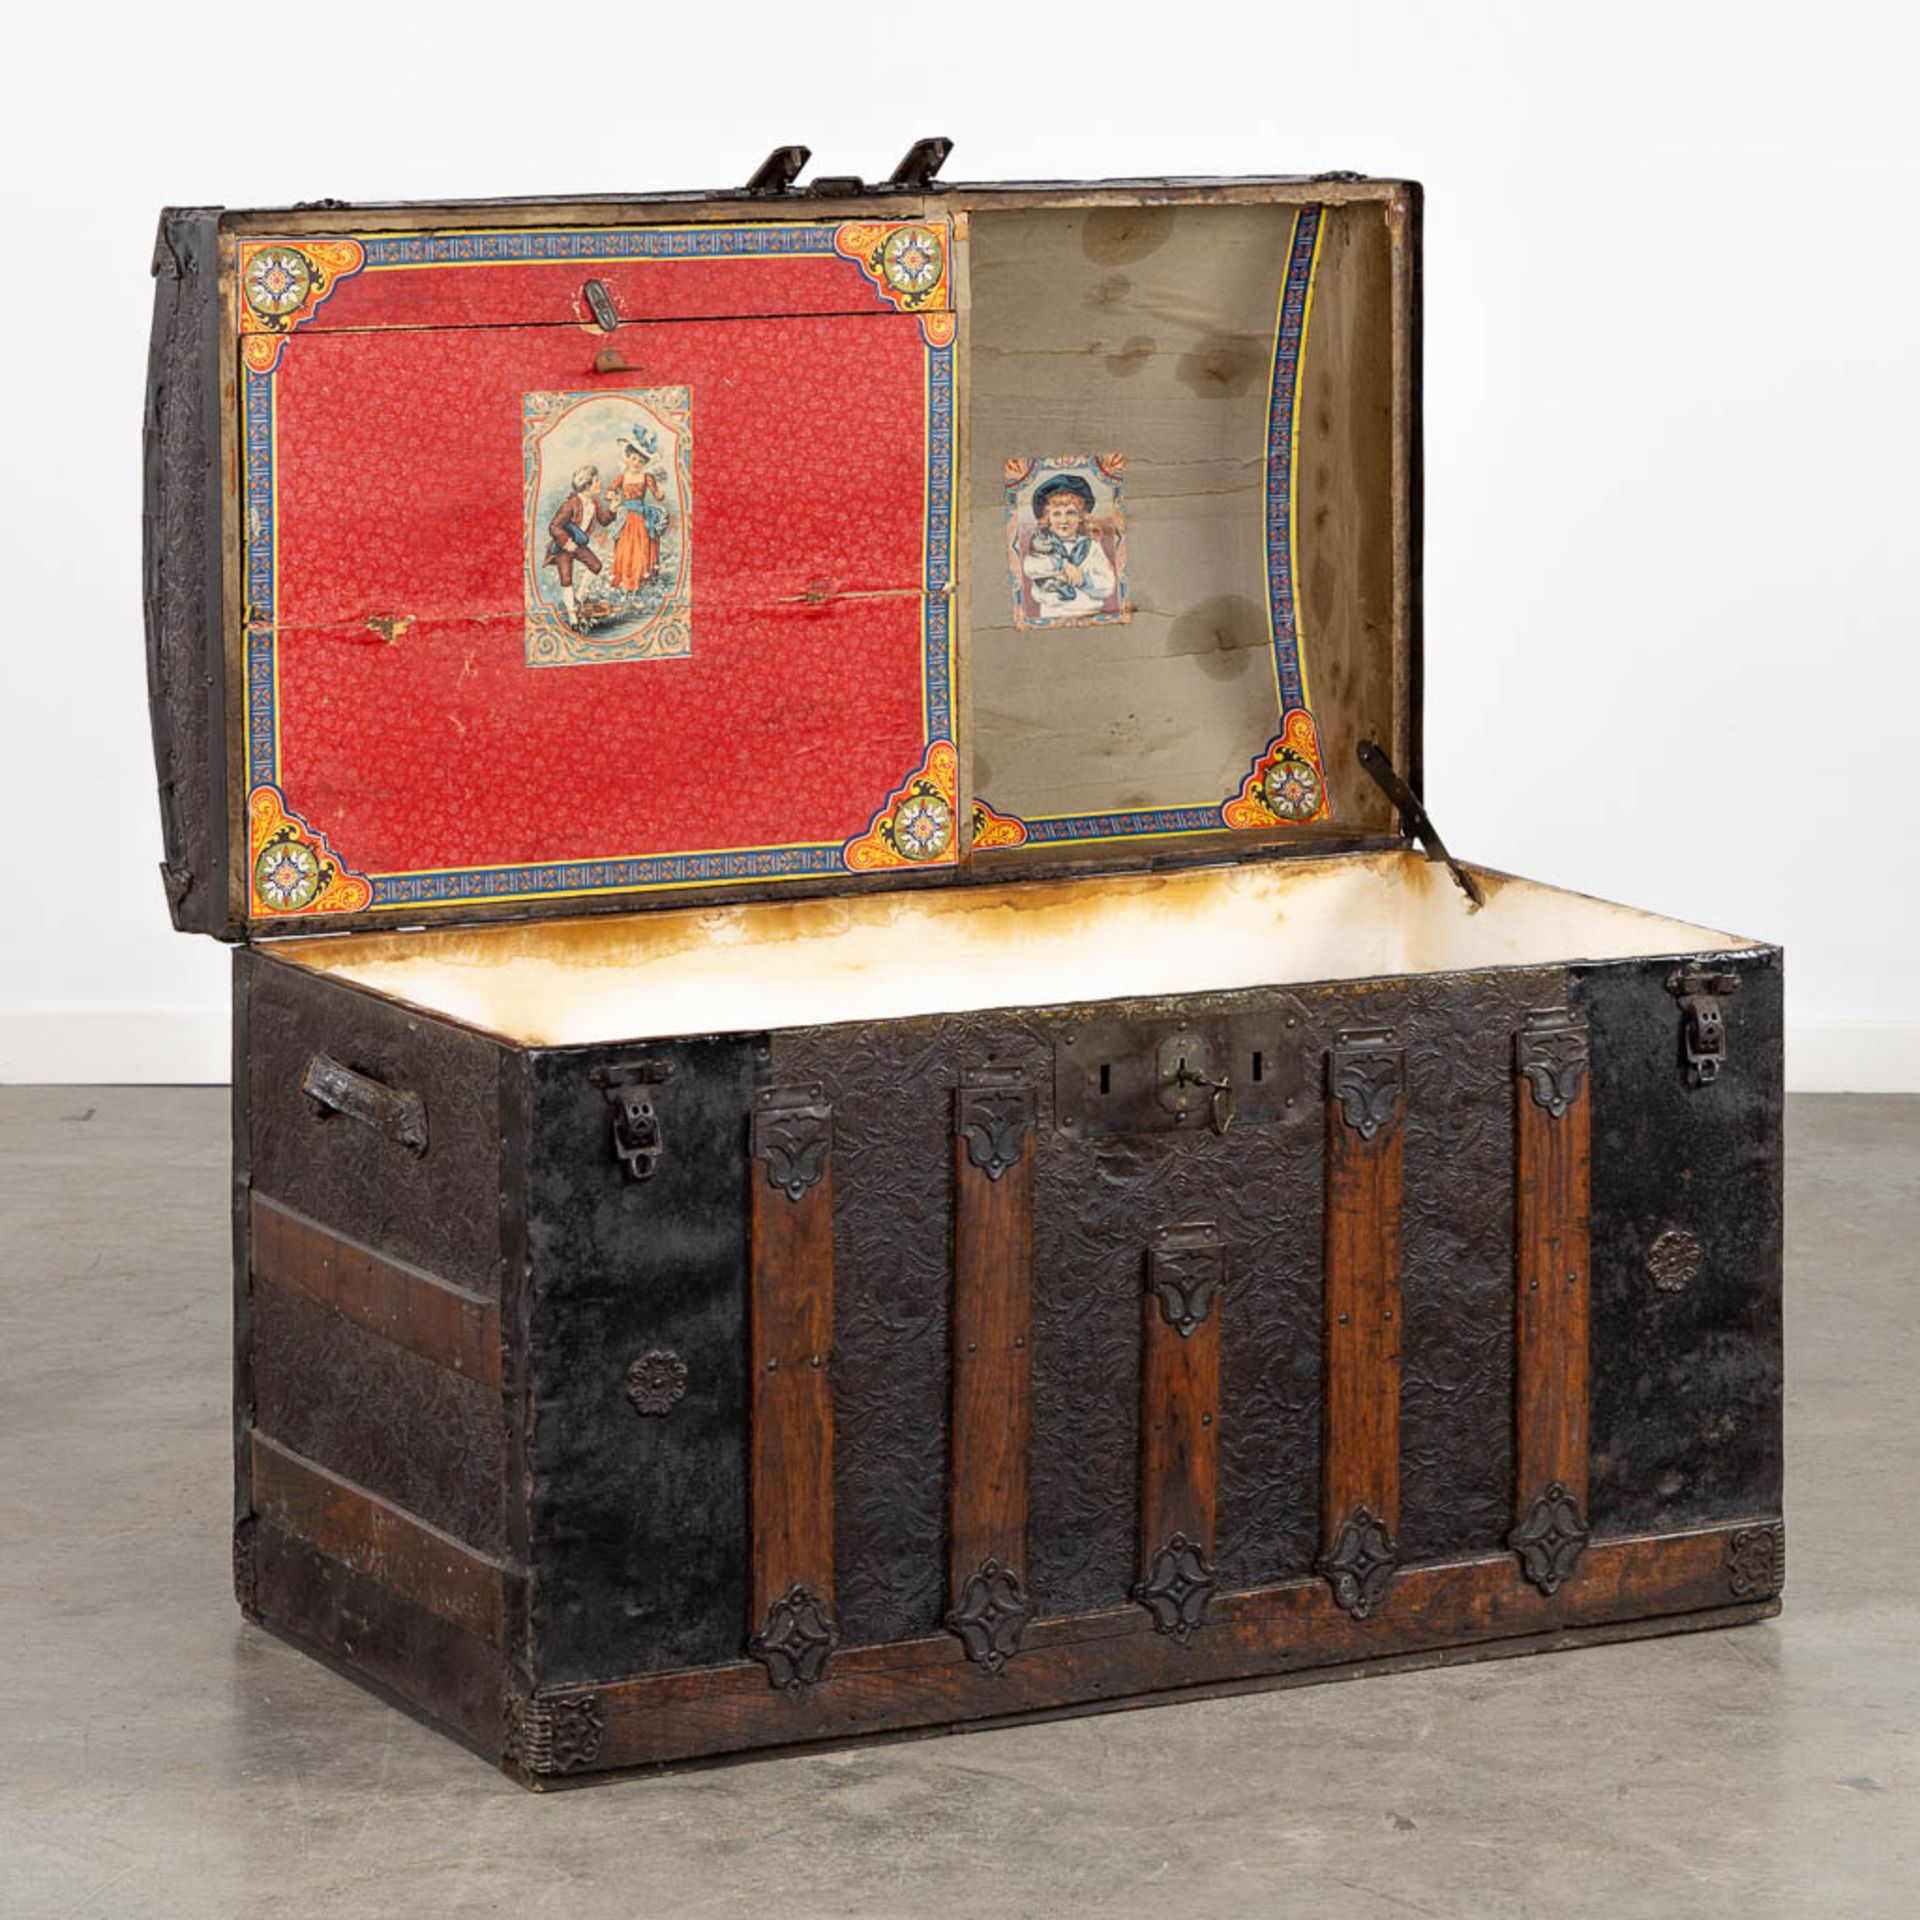 A large and antique chest decorated with leather and metal. (L:48 x W:95 x H:65 cm) - Bild 3 aus 13